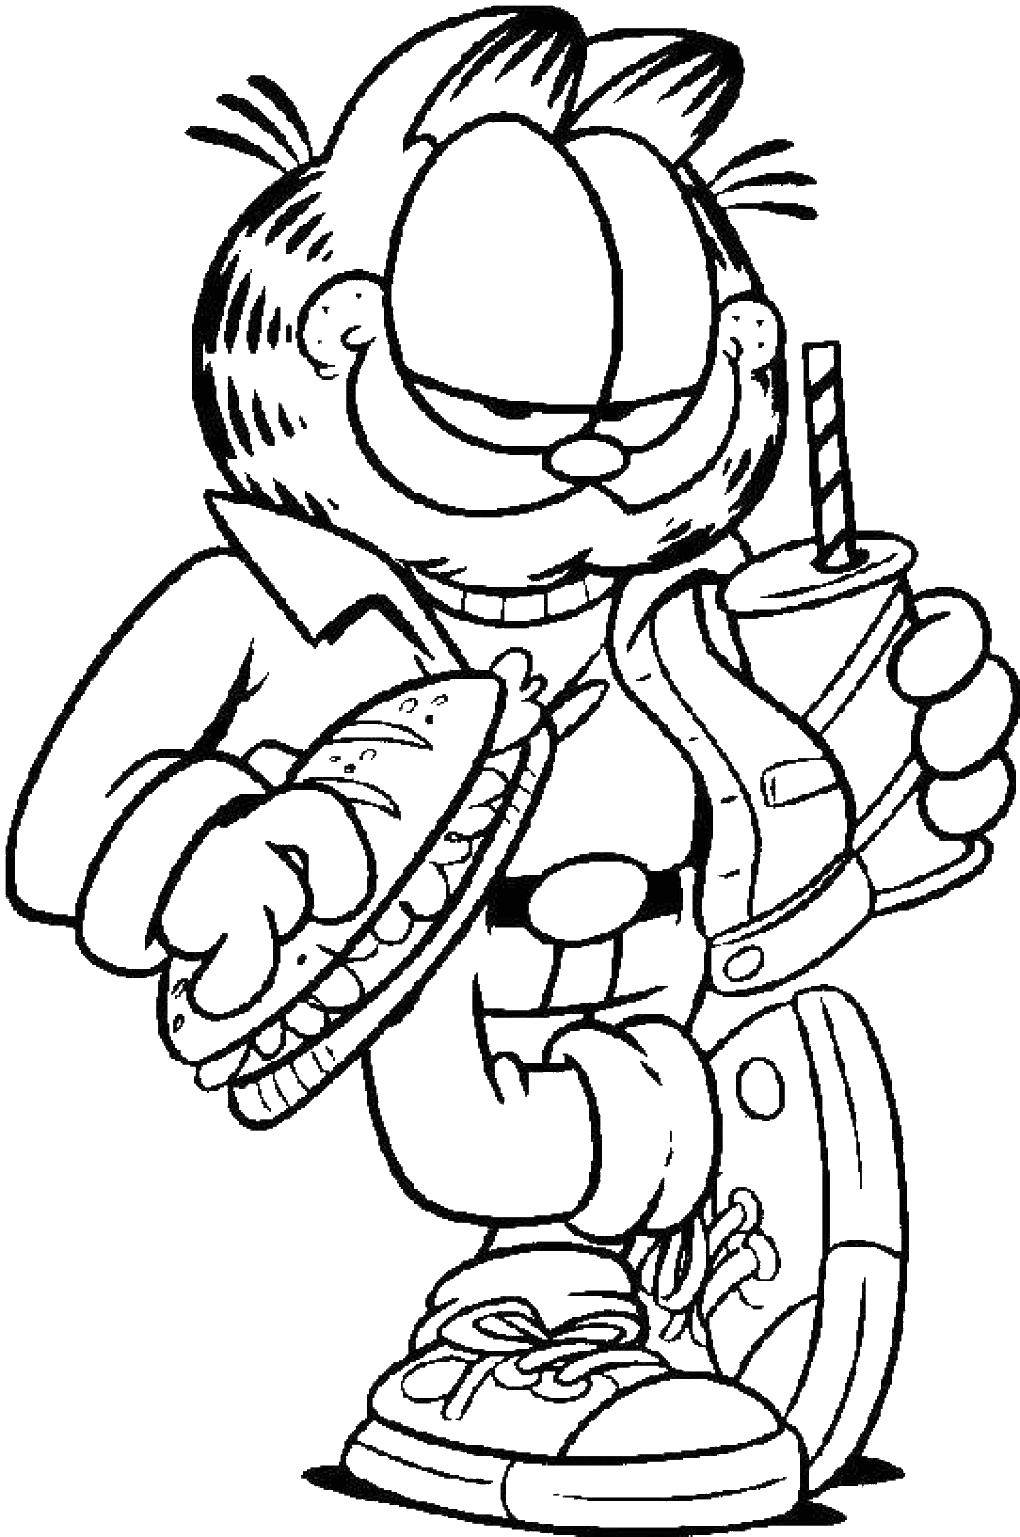 Coloring Garfield with gamblera and juice. Category cartoons. Tags:  Garfield .